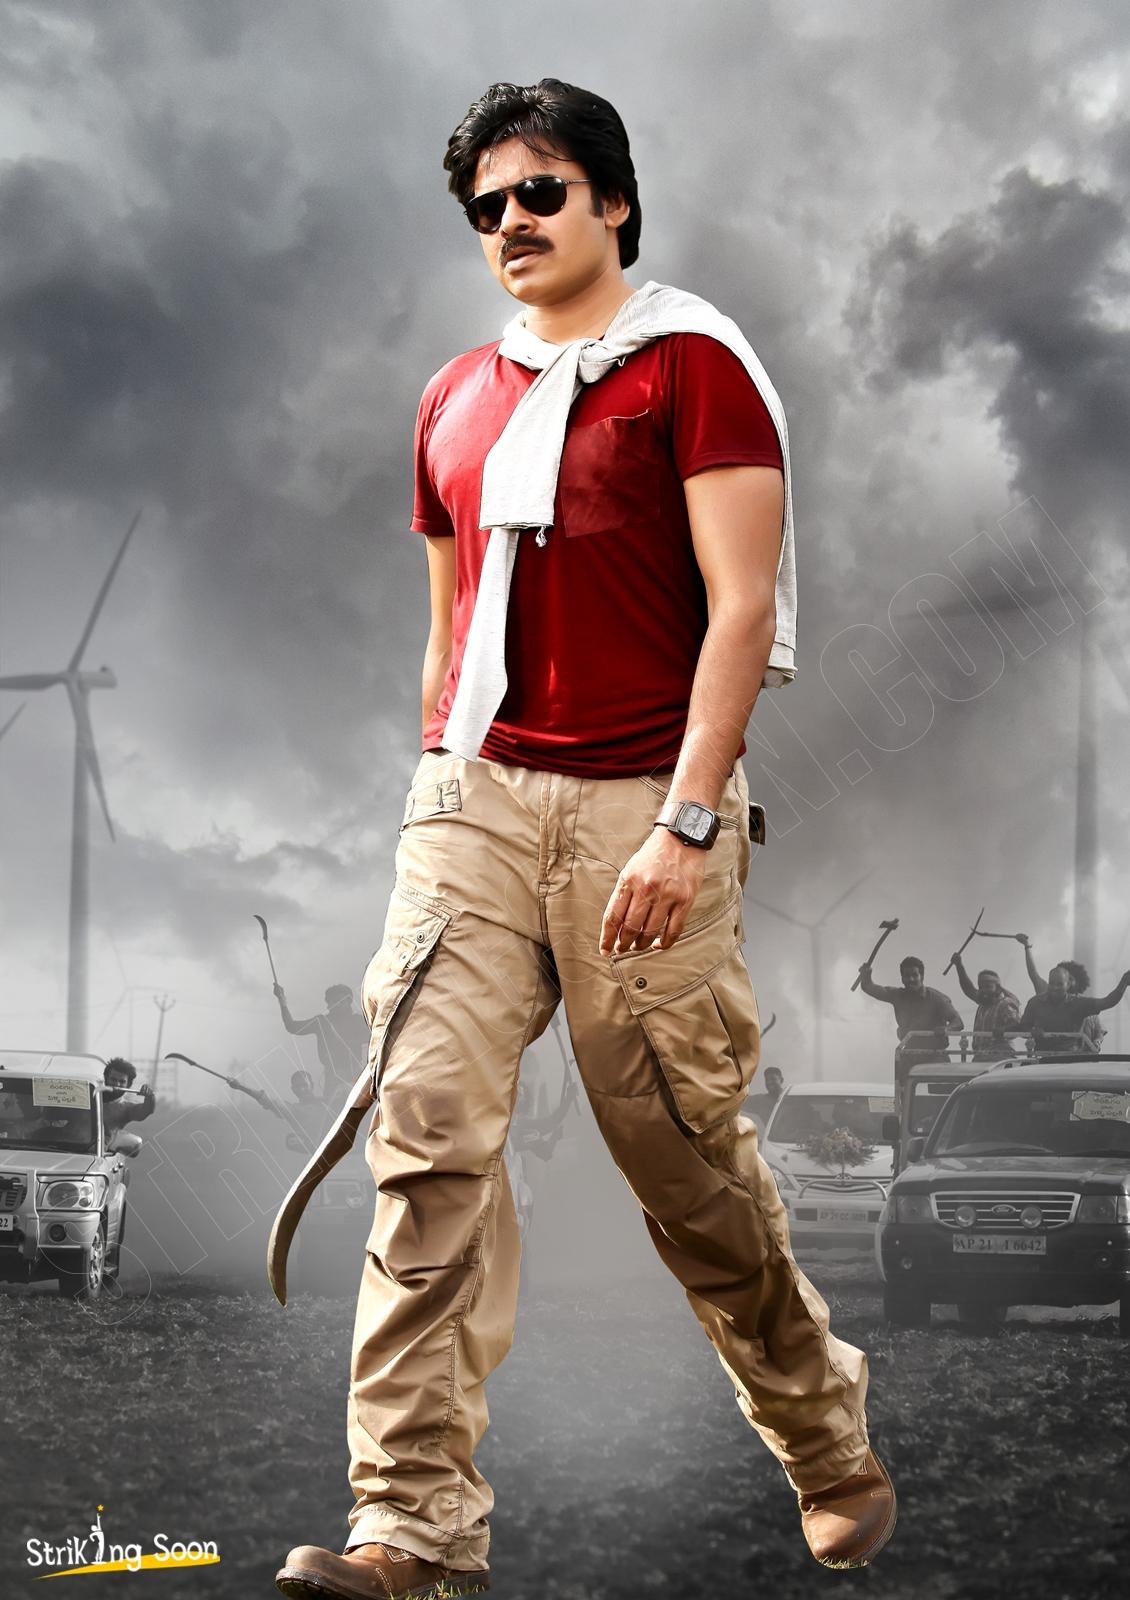 Power Star Wallpapers - Wallpaper Cave